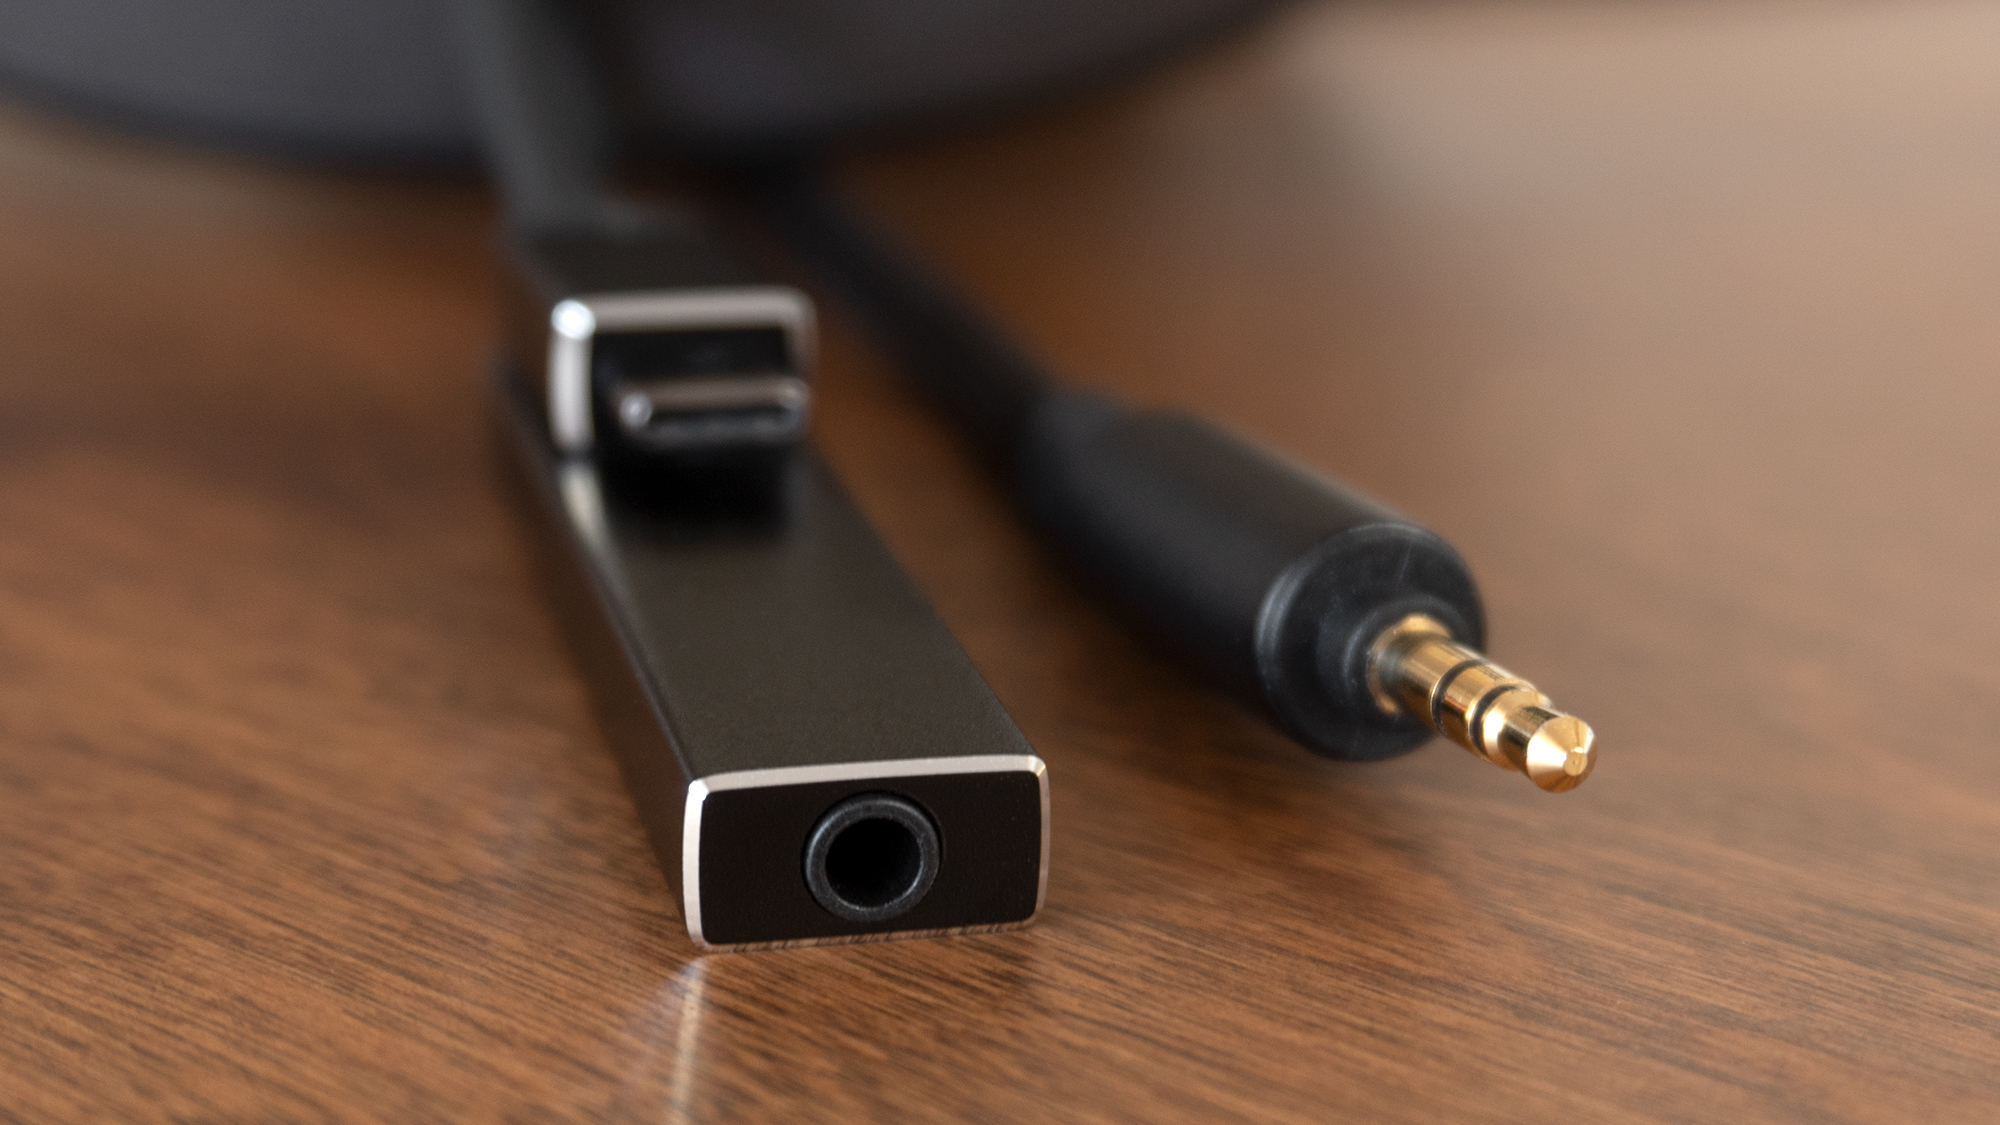 On one end of the THX Onyx is a USB-C connector, while the other features a standard 3.5mm headphone jack. (Photo: Andrew Liszewski/Gizmodo)